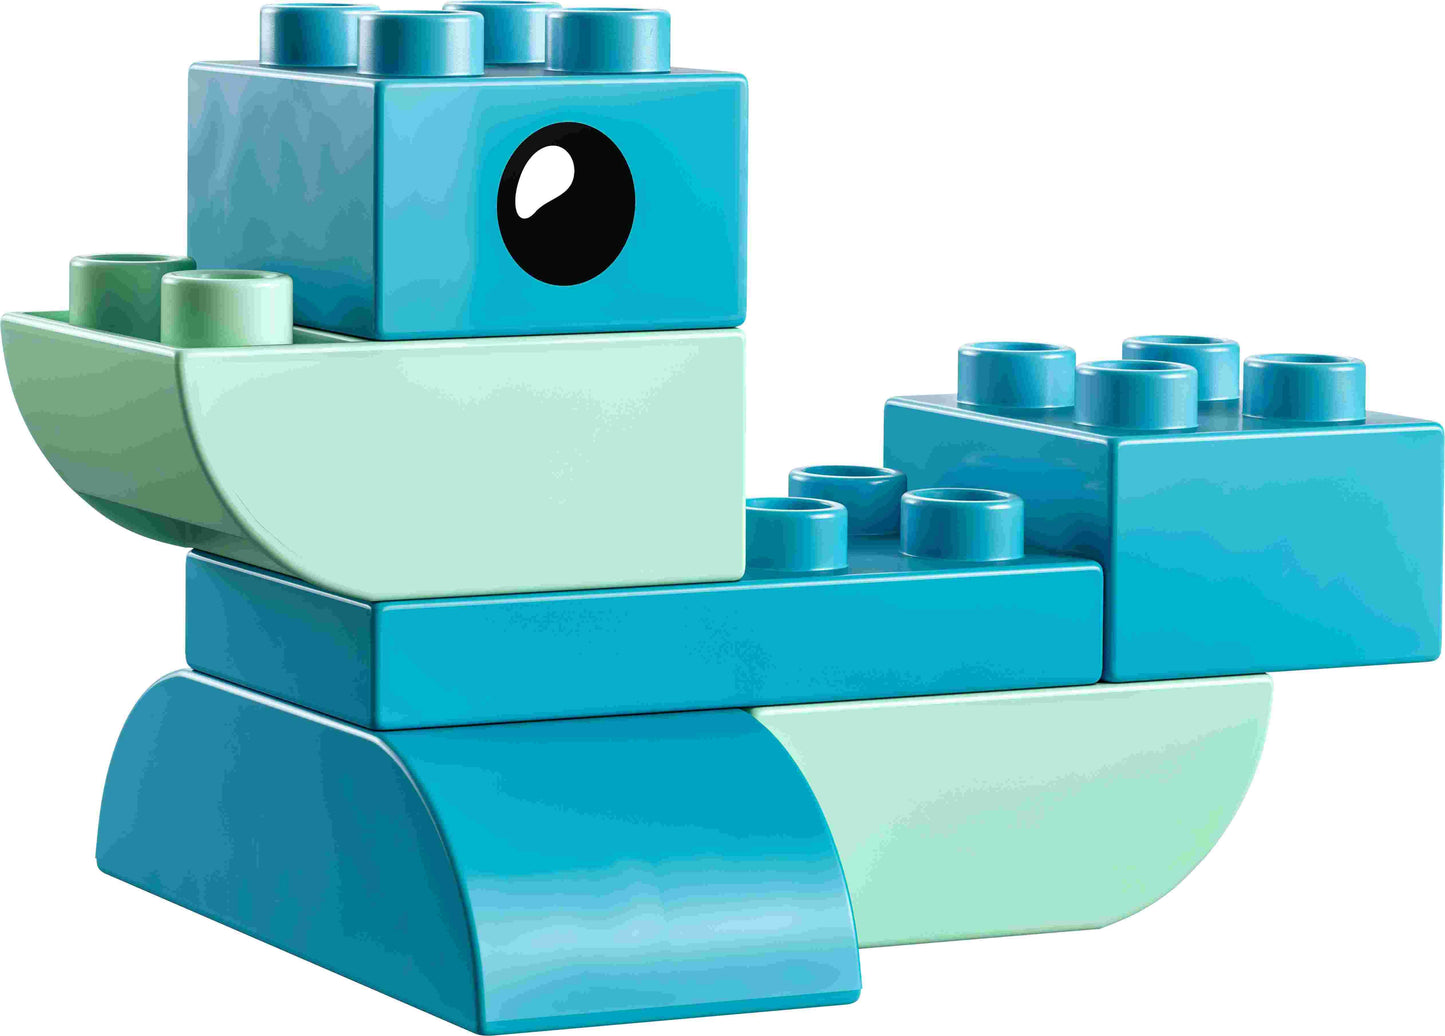 LEGO Duplo - Whale 3 in 1 - Poly Bag